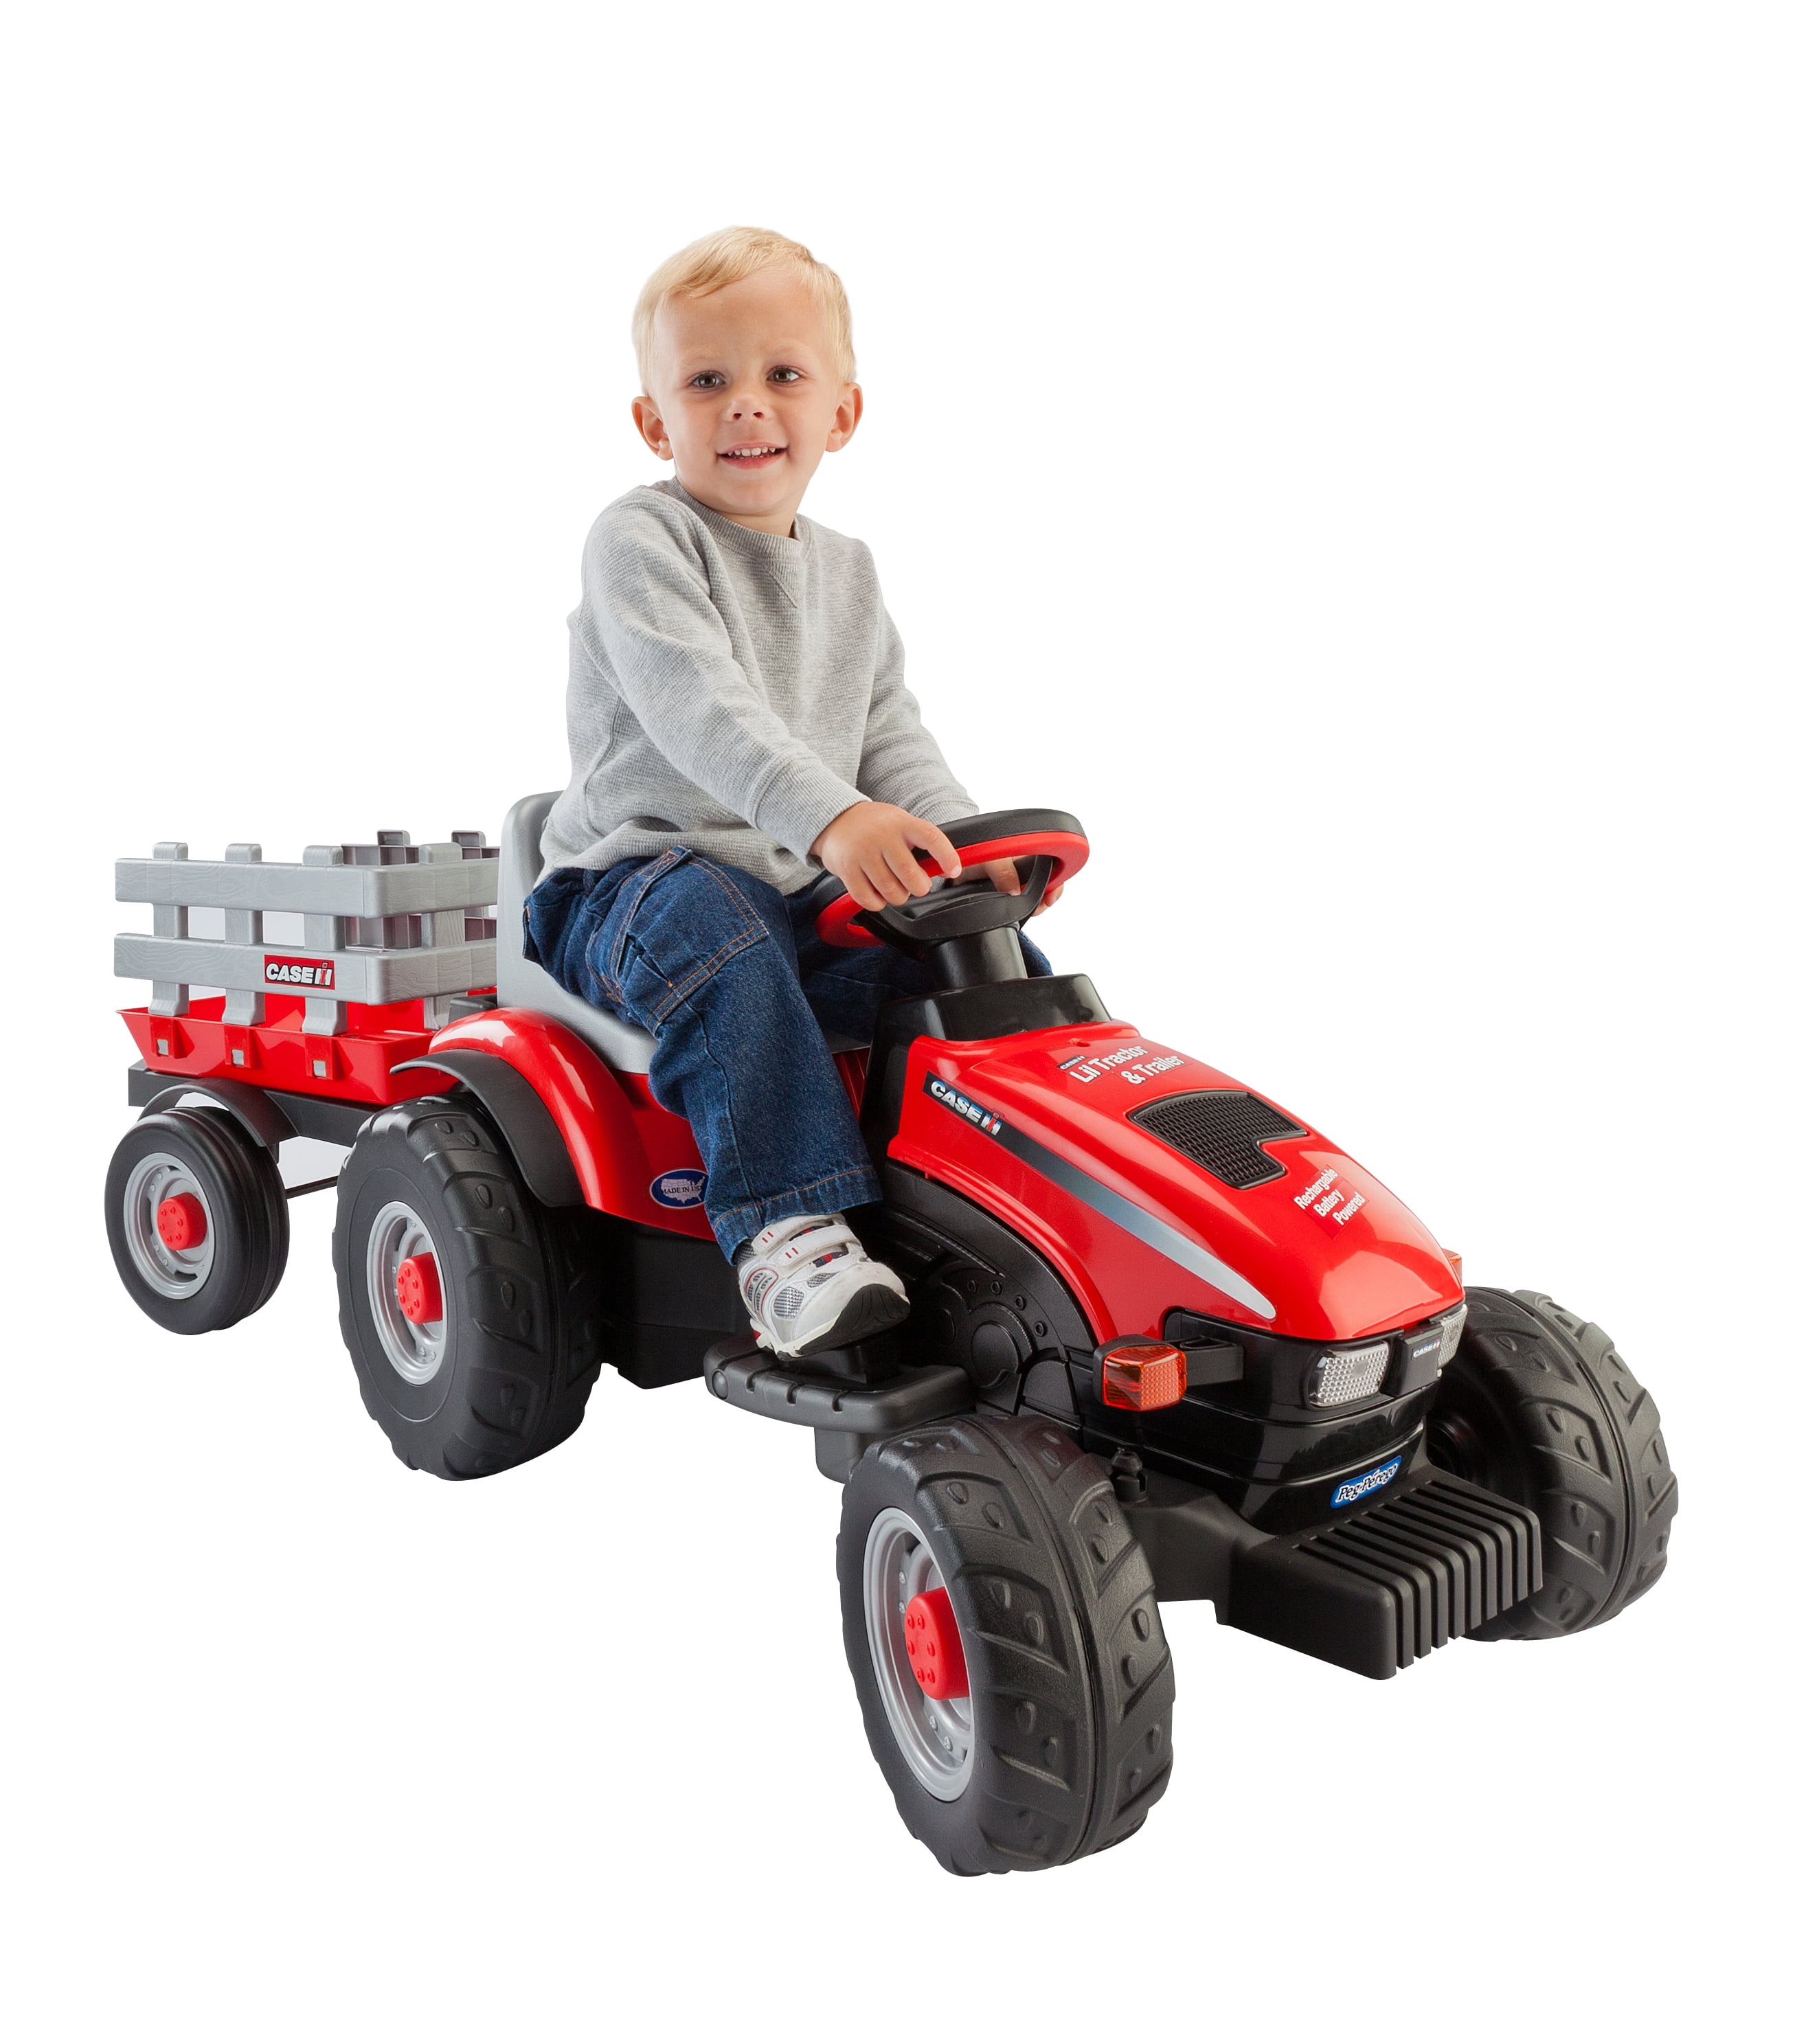 Peg Perego Case IH Lil' Tractor and 